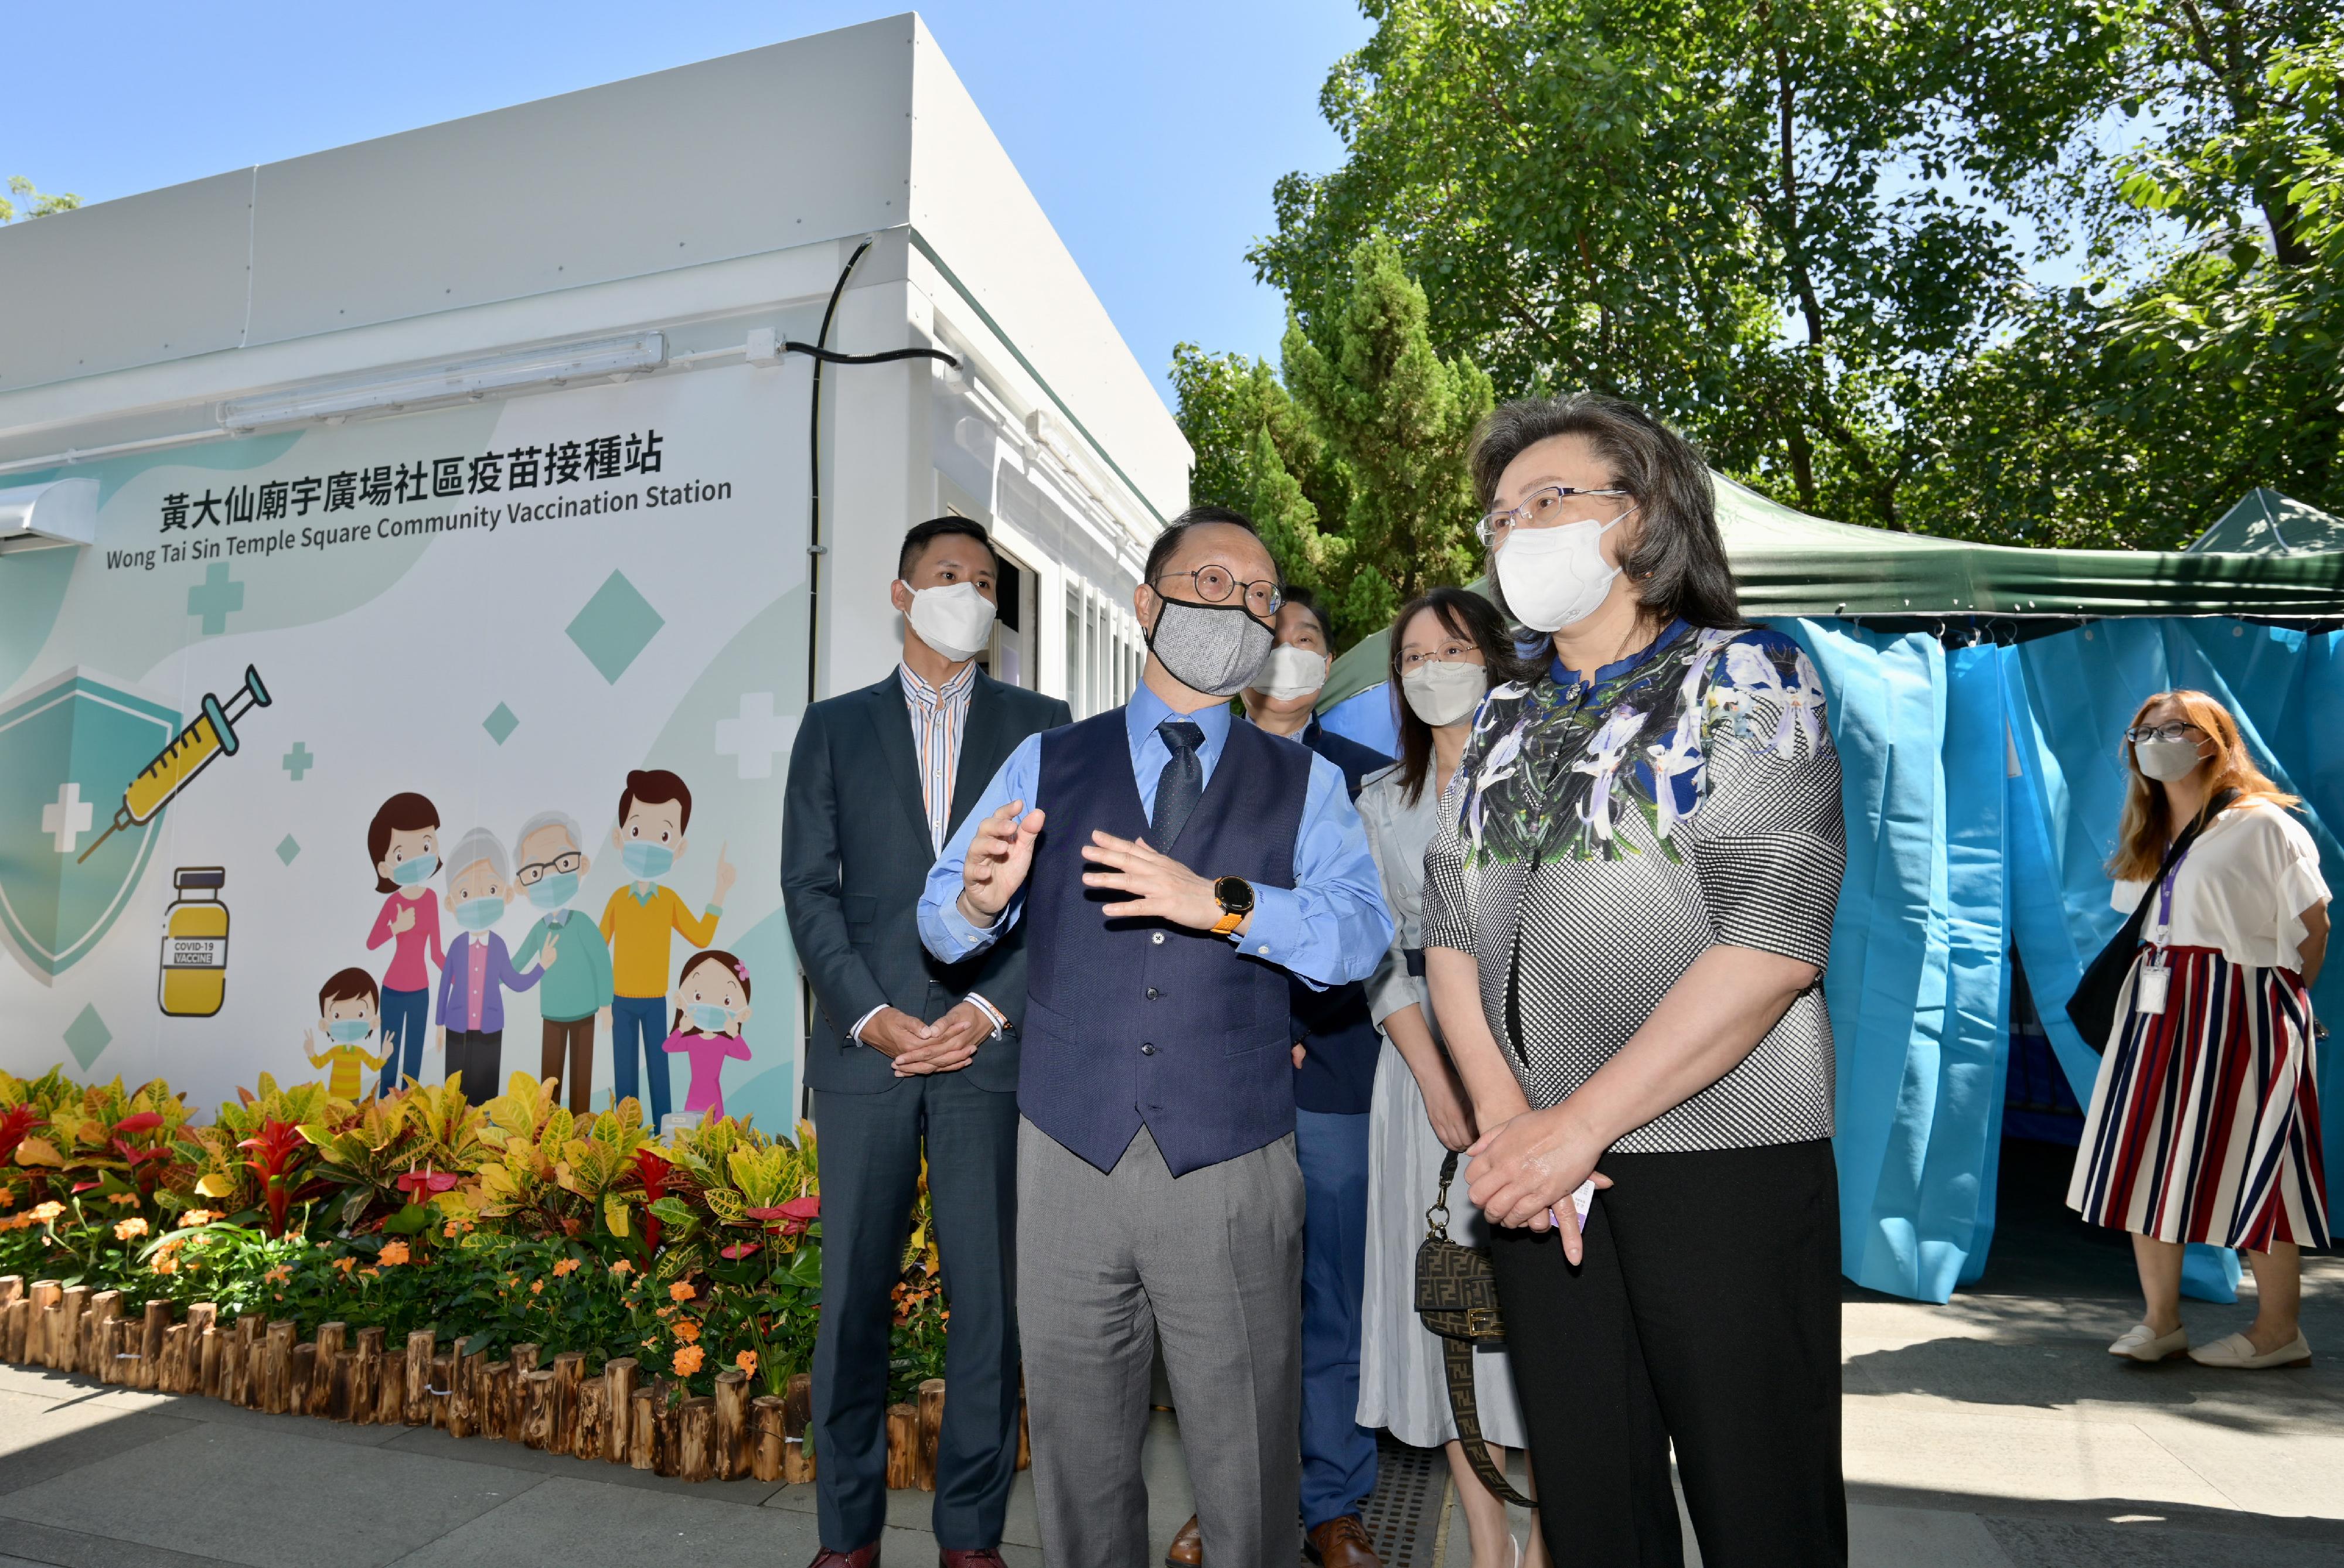 The Secretary for the Civil Service, Mrs Ingrid Yeung, visited the Wong Tai Sin Temple Square Community Vaccination Station (CVS) this morning (October 12) to view its first-day operation. Photo shows Mrs Yeung (first right) being briefed by the person-in-charge of the medical partner of the CVS, Dr Ares Leung (second left), on the CVS's operation. Looking on is the District Officer (Wong Tai Sin), Mr Steve Wong (first left).